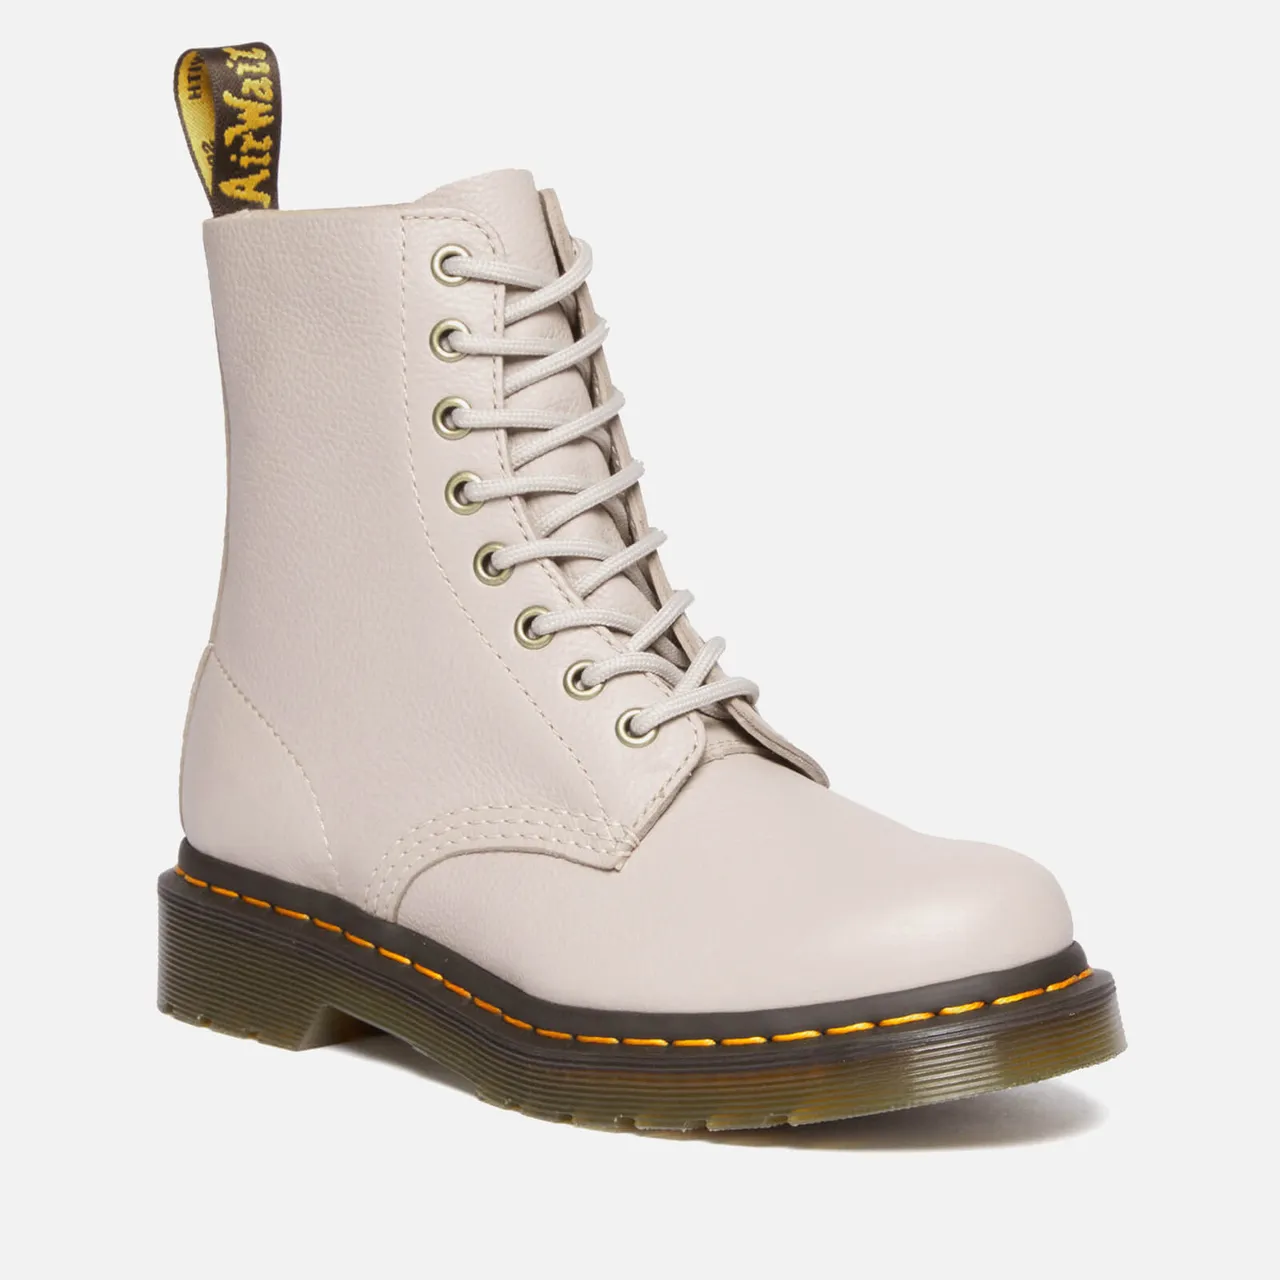 Dr. Martens Women's 1460 Pascal Virginia Leather 8-Eye Boots - UK